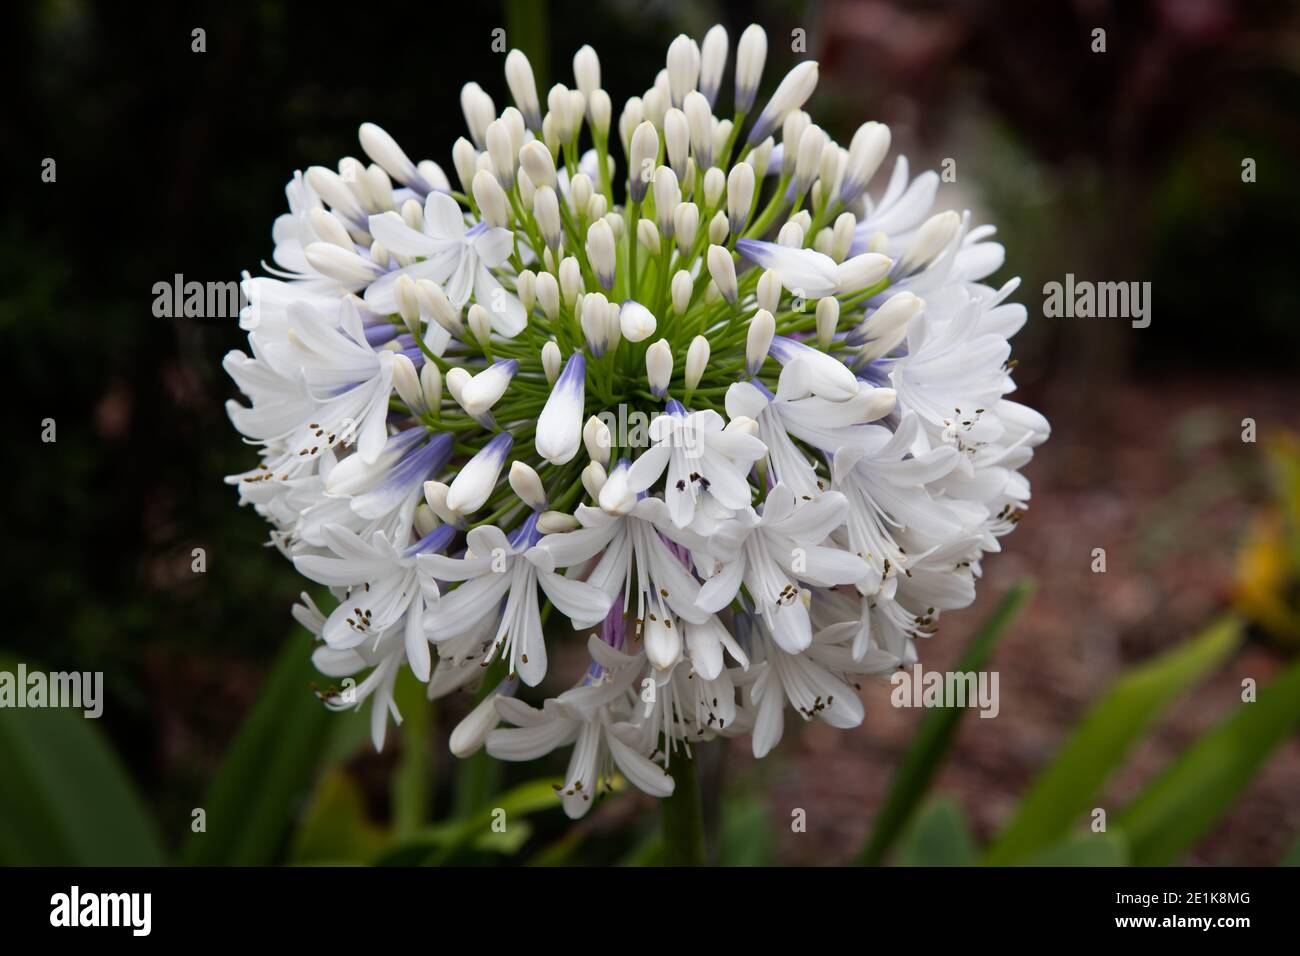 White Agapanthus flowers with hints of purple blooming in the garden Stock Photo